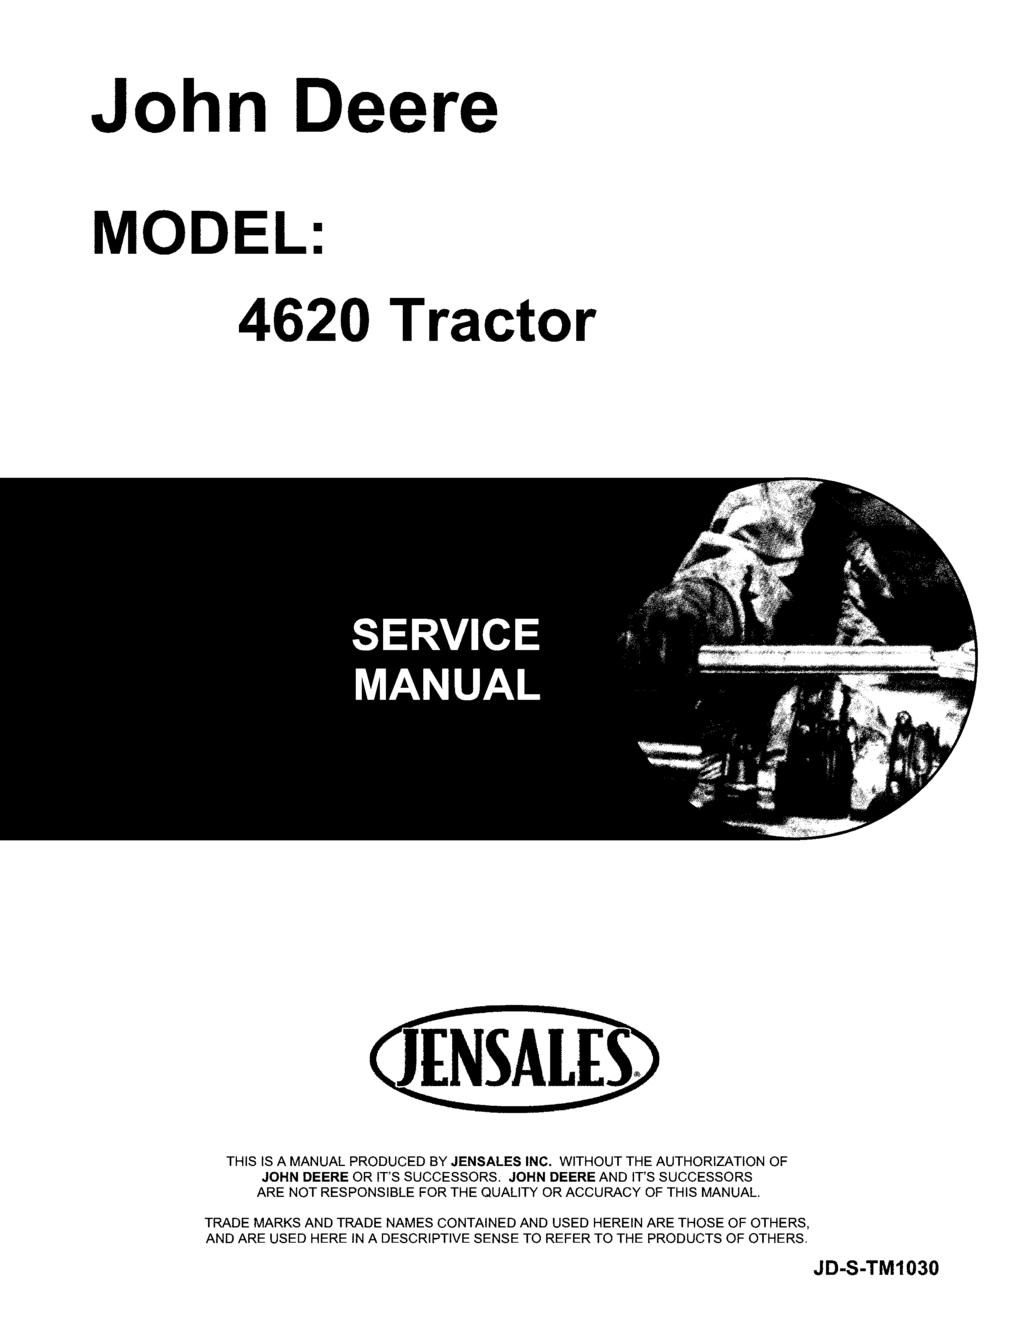 John Deere MODEL: 4620 Tractor THIS IS A MANUAL PRODUCED BY JENSALES INC. WITHOUT THE AUTHORIZATION OF JOHN DEERE OR IT'S SUCCESSORS.